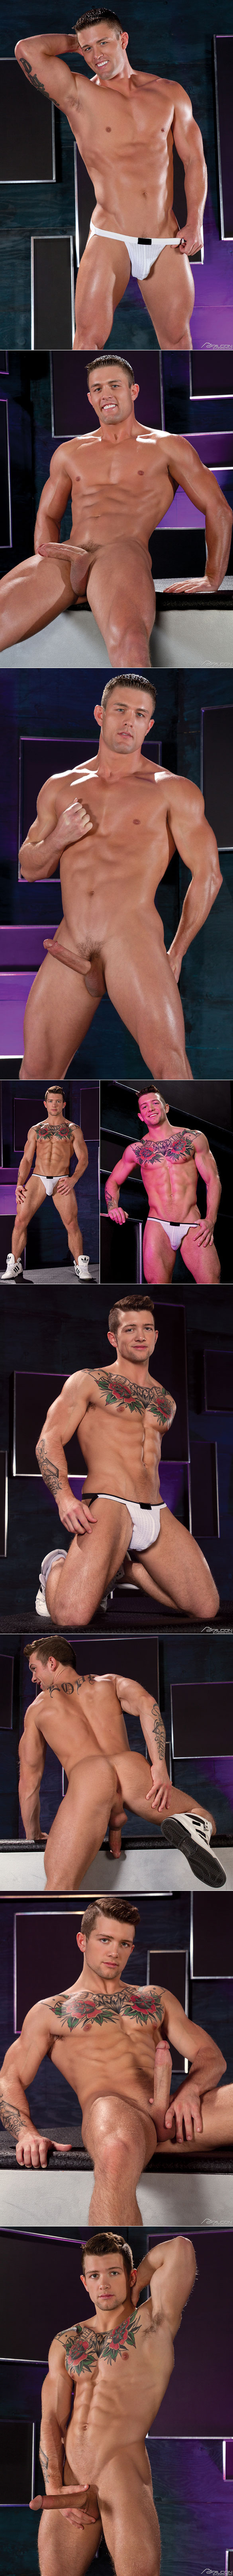 HotHouse: Ryan Rose gets pounded by Sebastian Kross